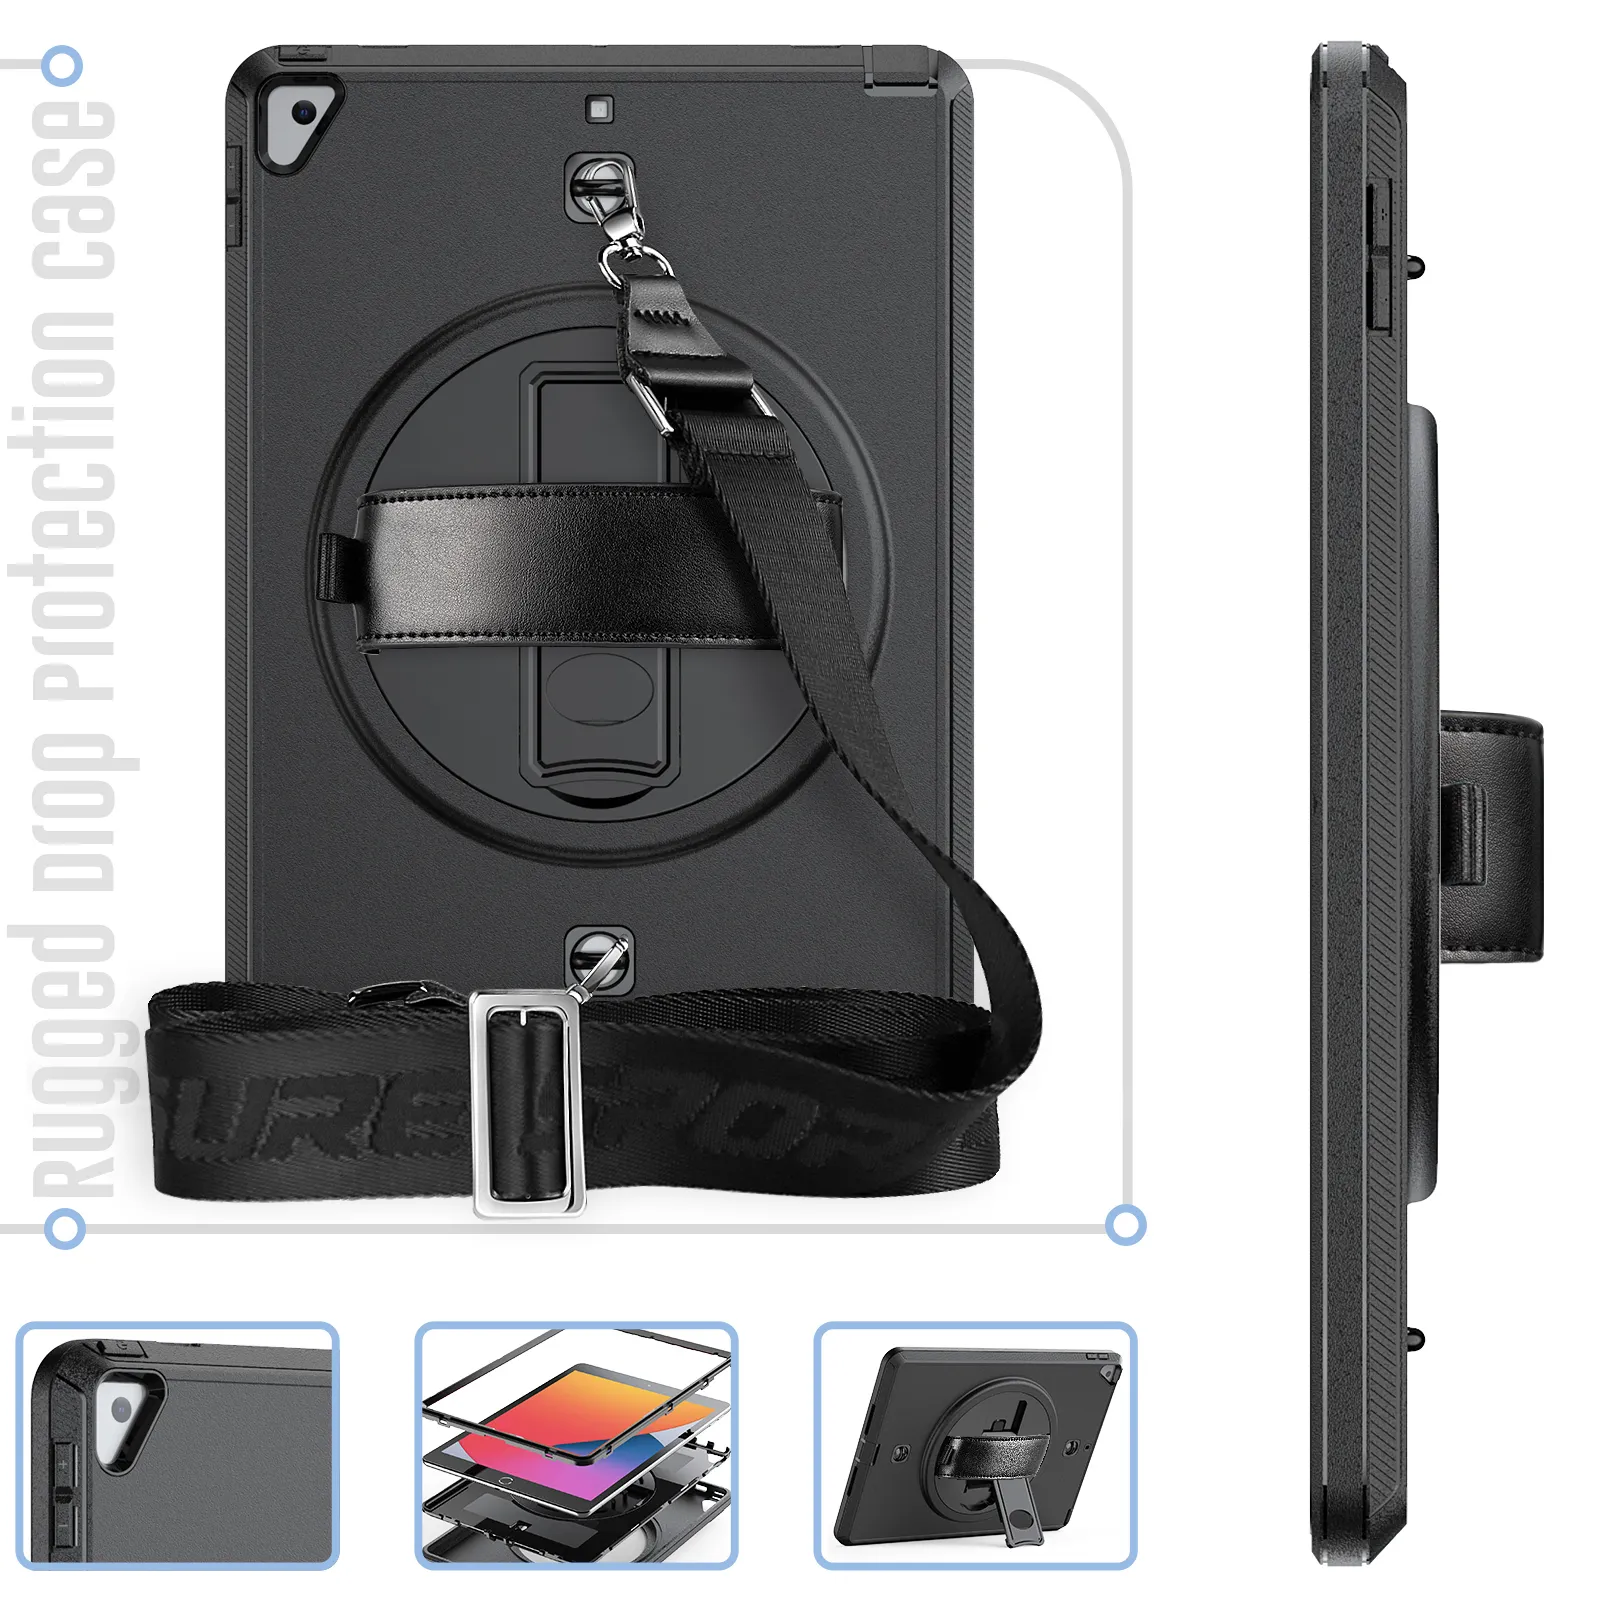 Universal Full protective shockproof Case Cover 3-layer Protective Case with Shoulder Strap for ipad 10.2/10.5 Inches